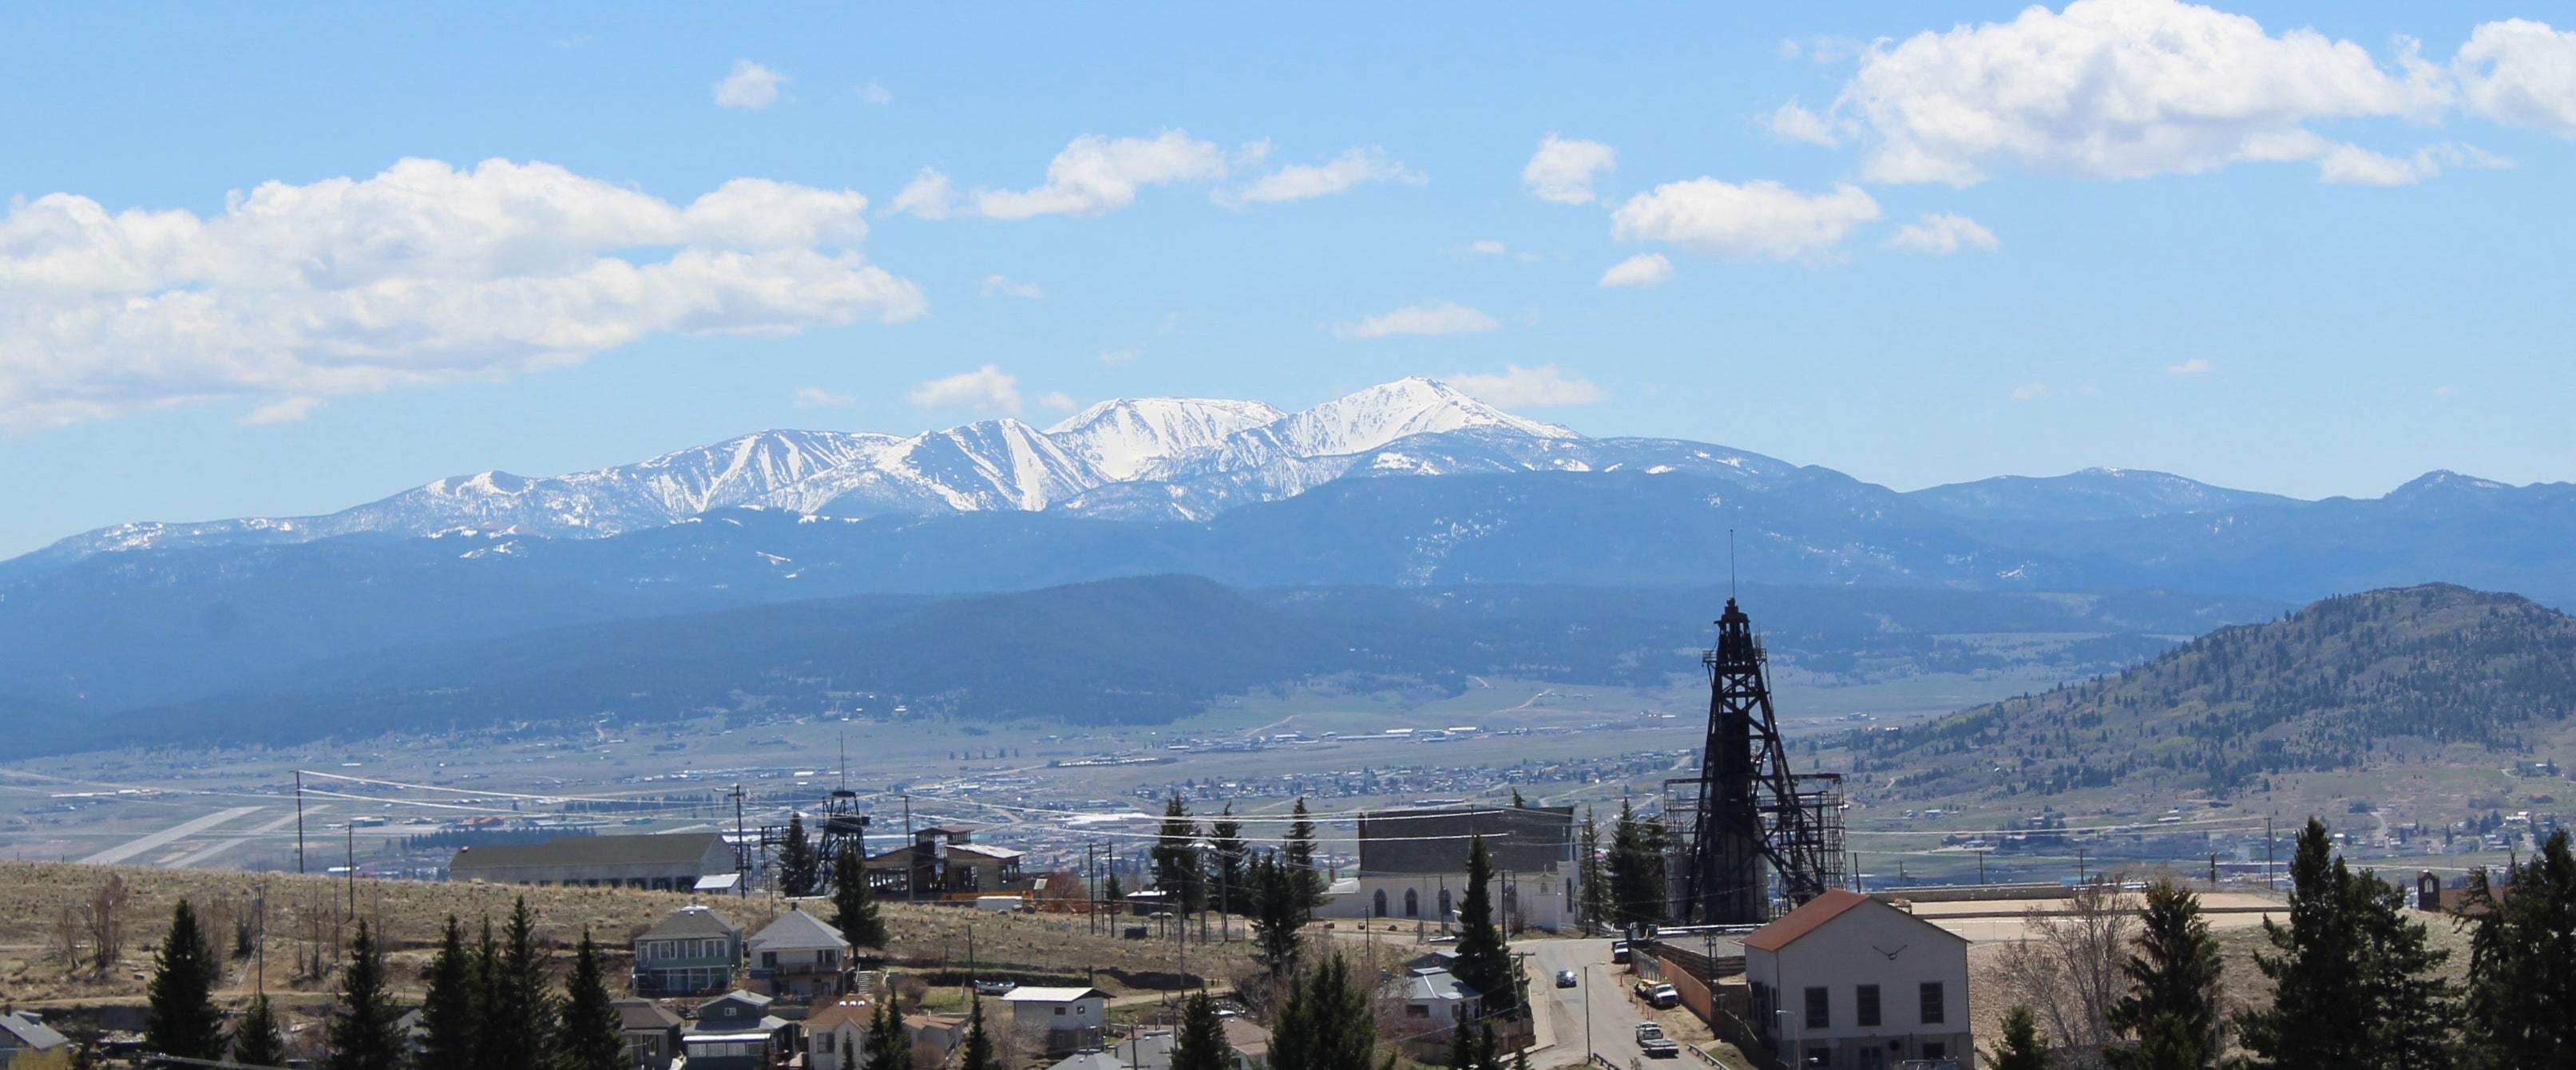 The highlands of butte, Montana overlooking the richest hill on earth